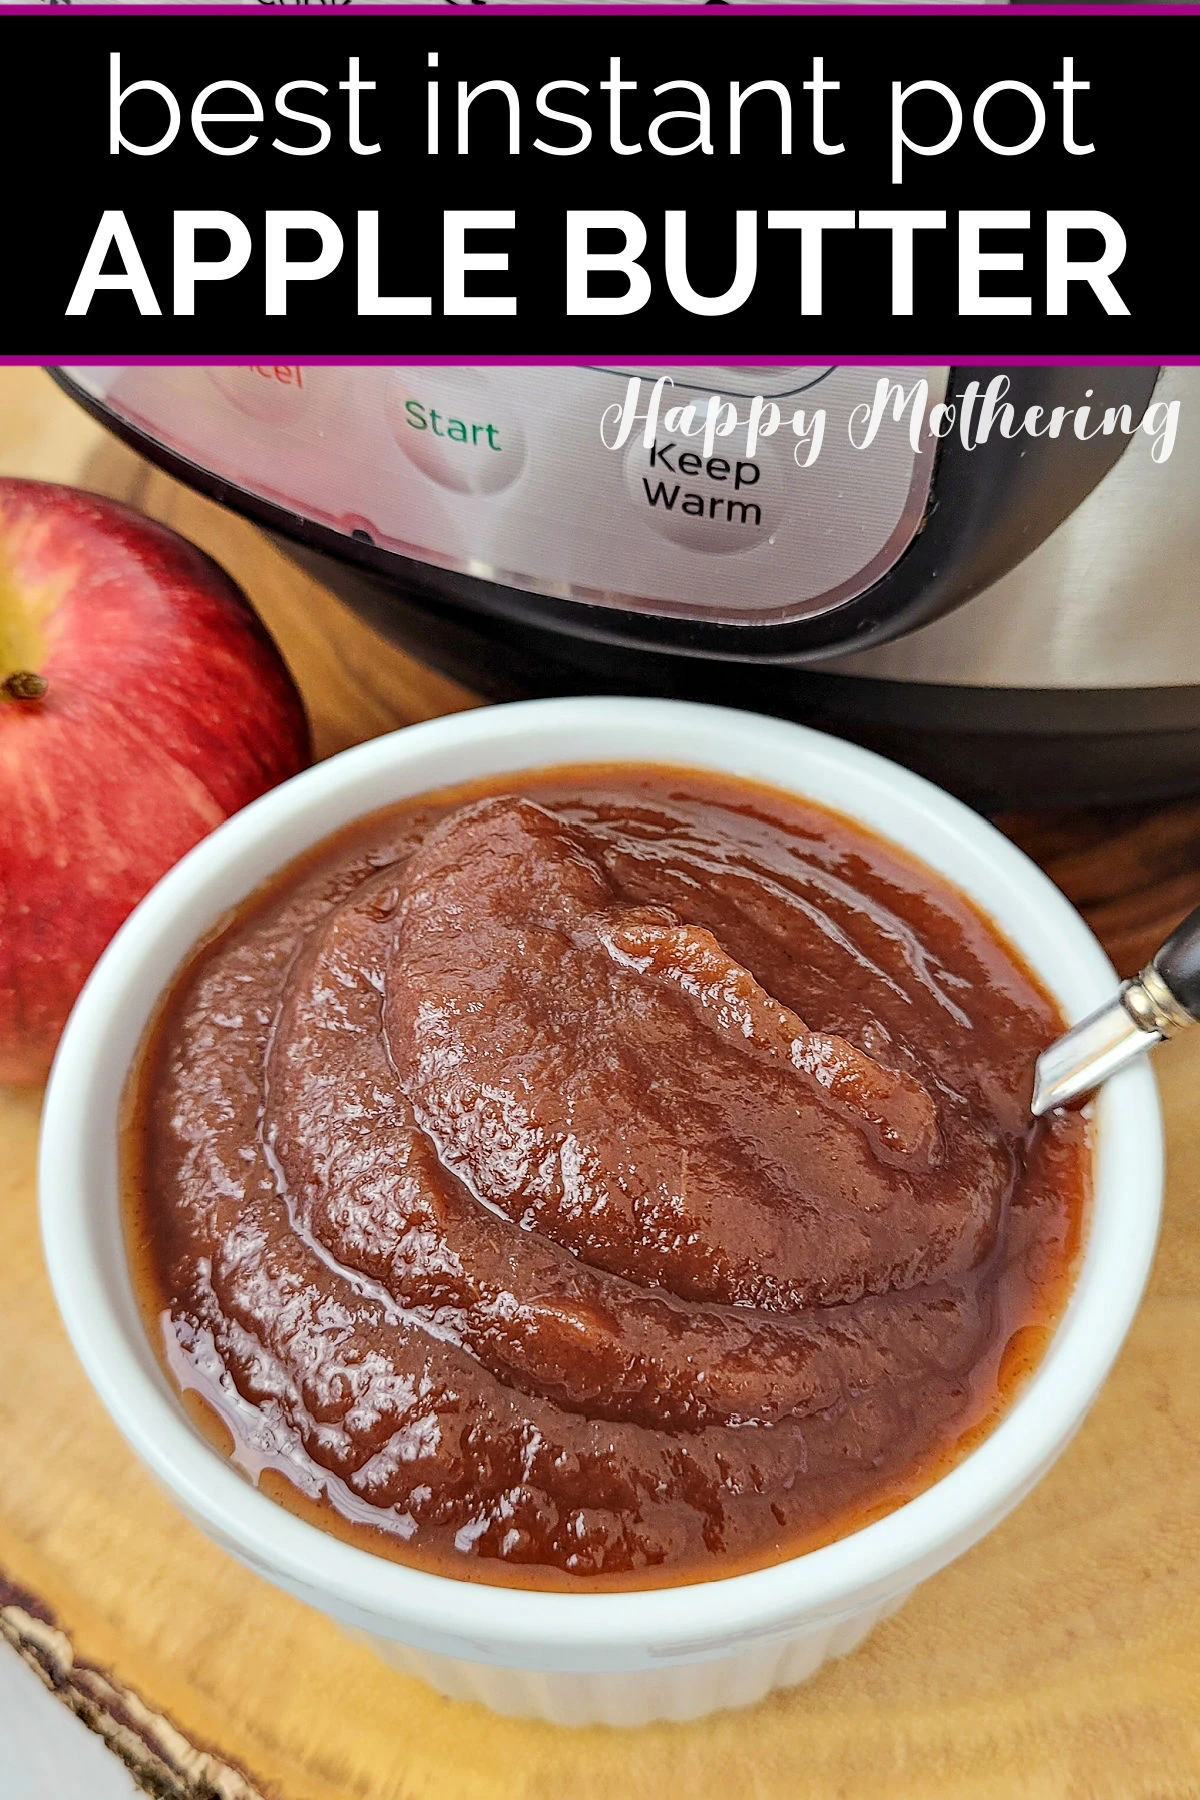 Smooth apple butter in a white bowl with a spoon in front of the Instant Pot it was made in.